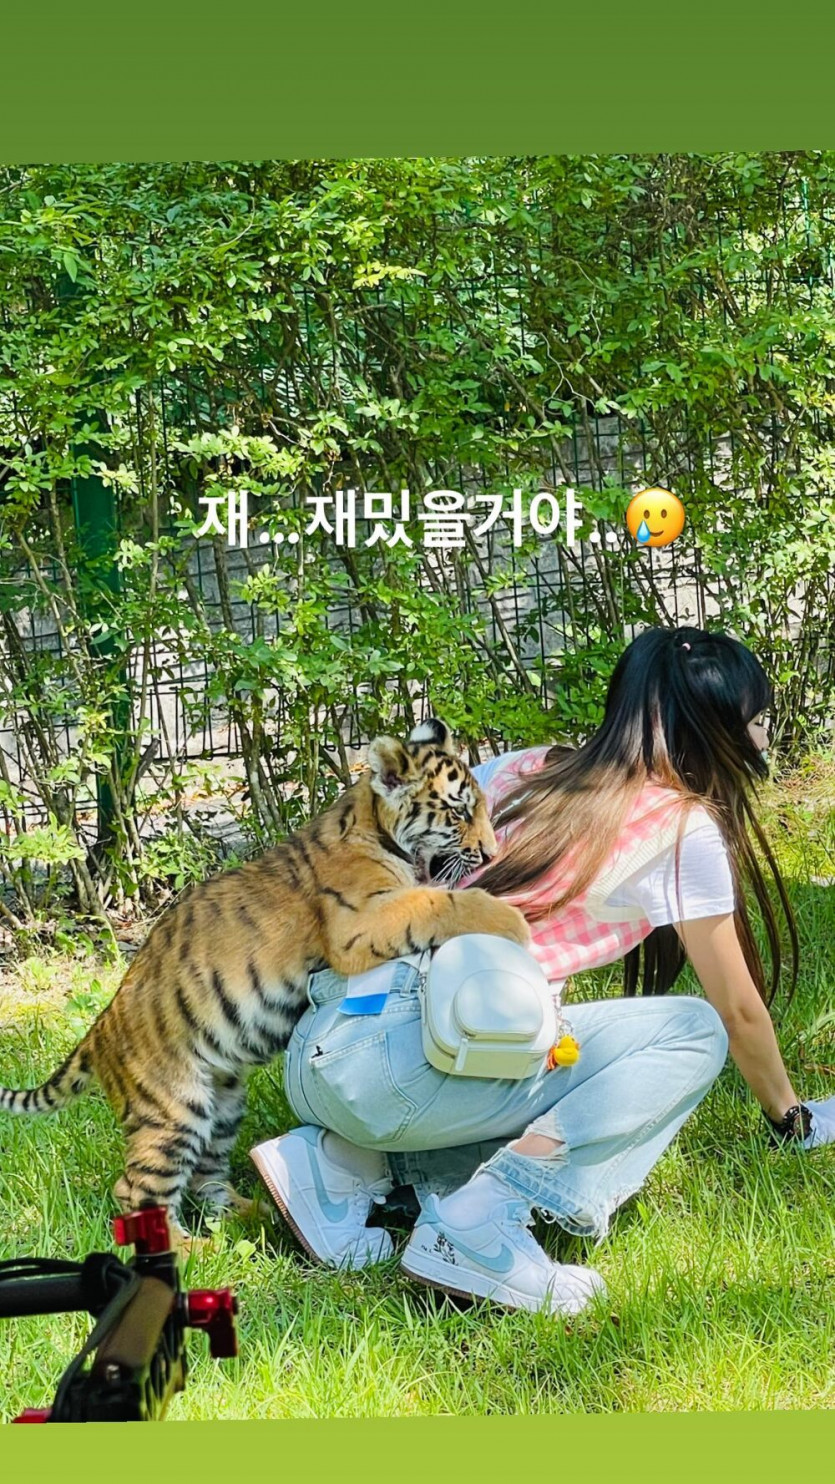 Yena, a duck caught by a tiger